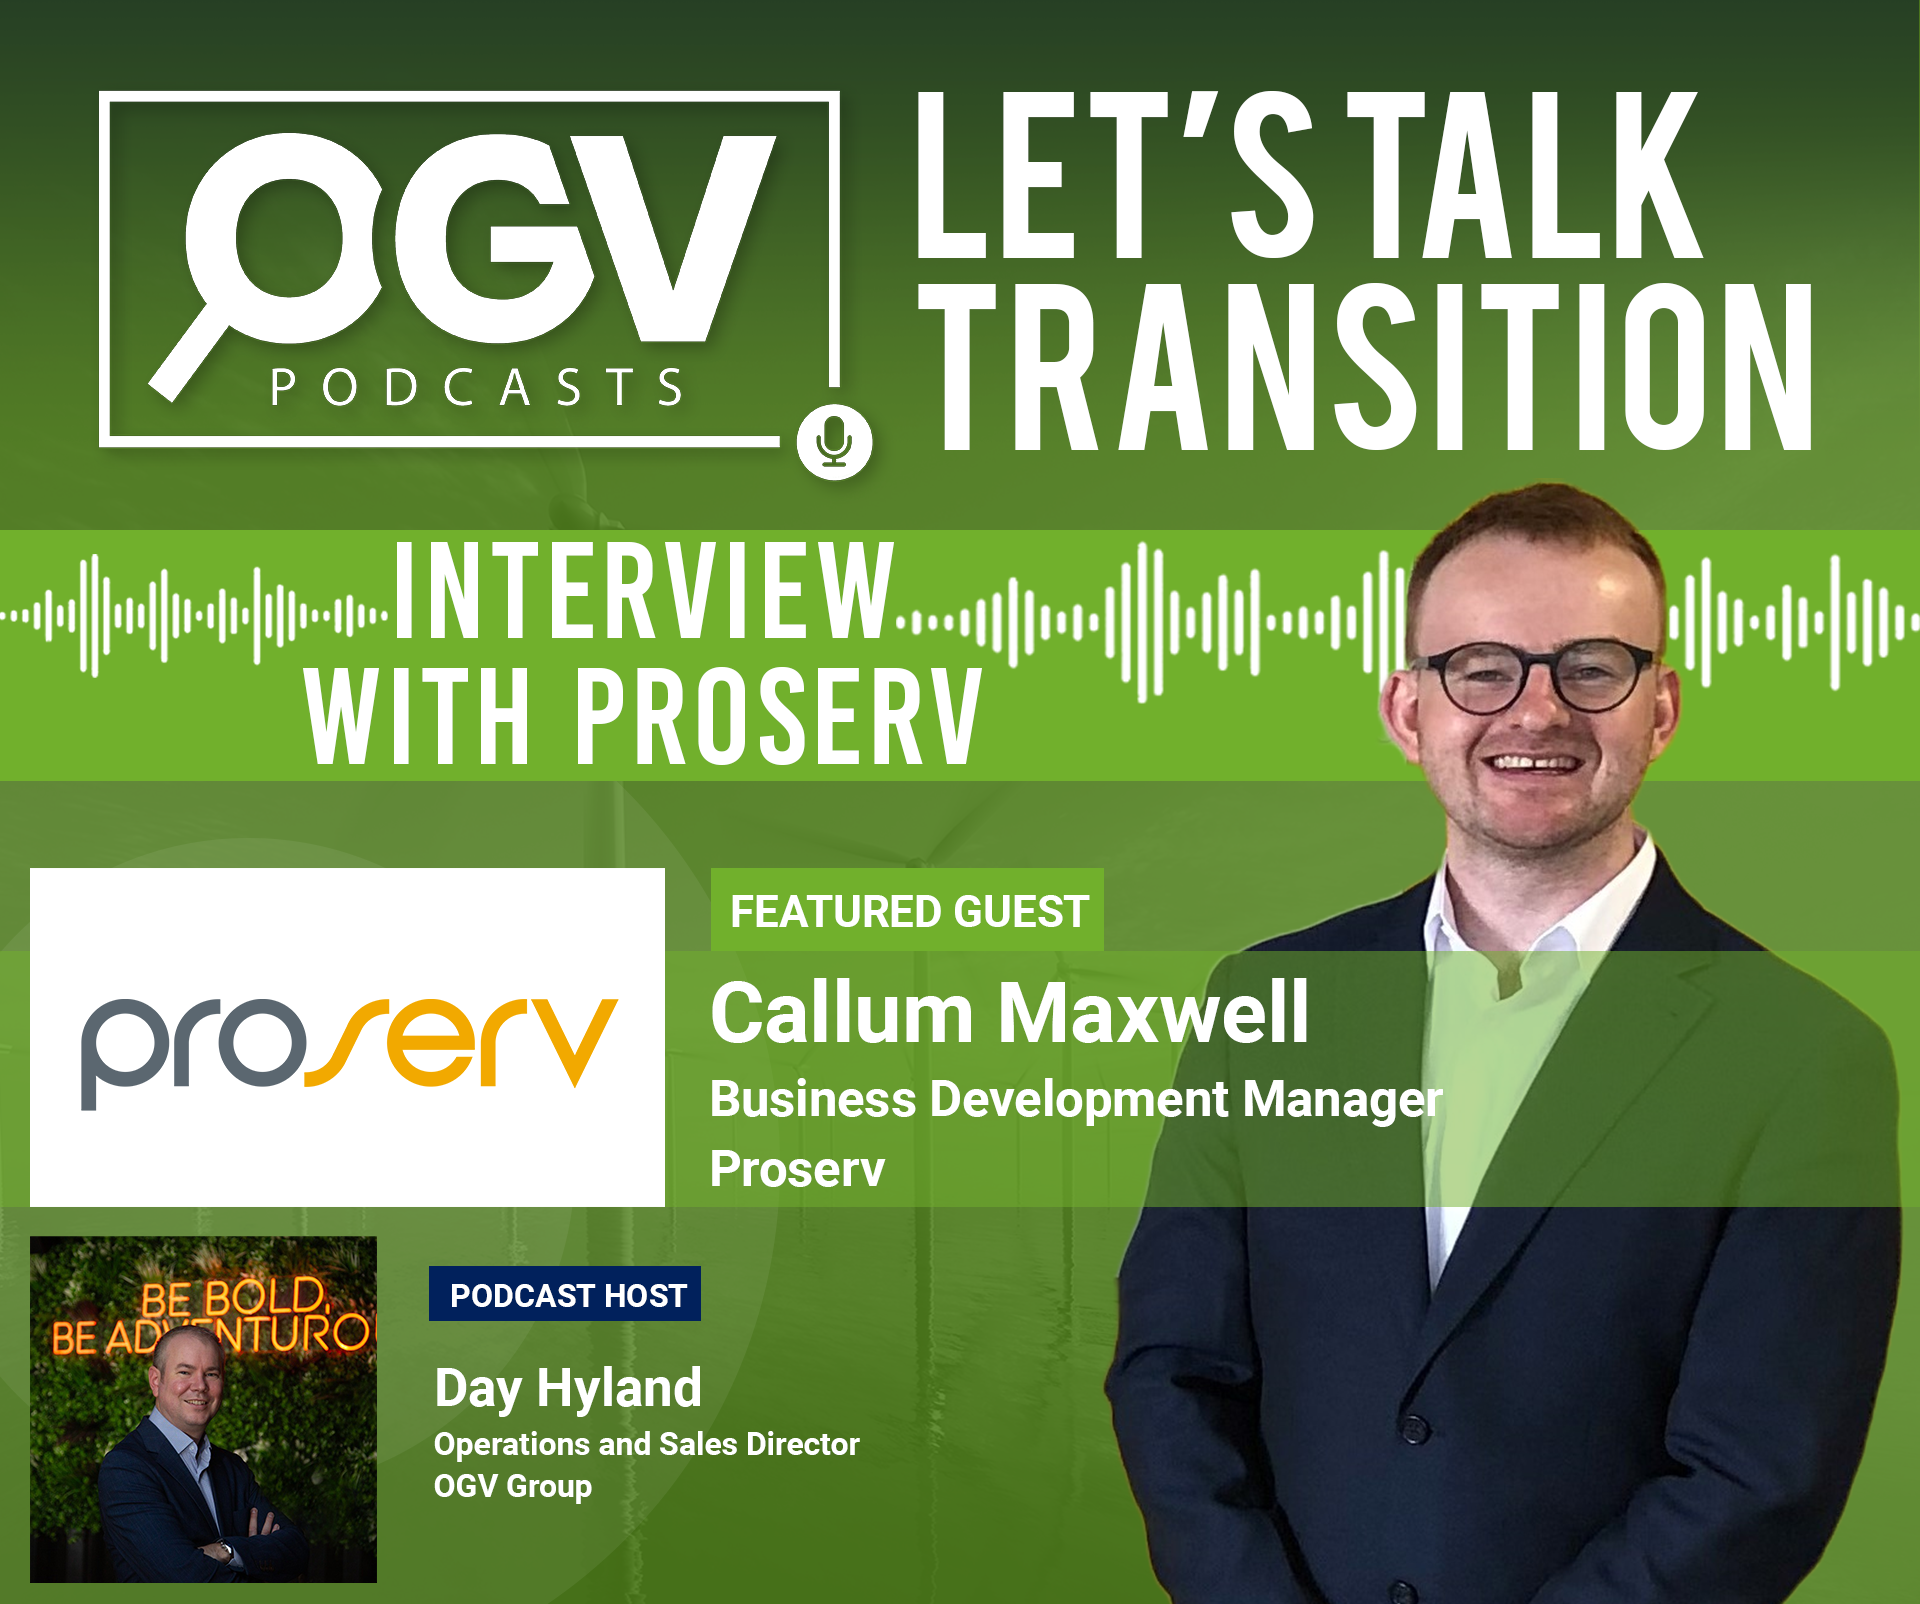 Let's Talk Transition: Interview with Proserv